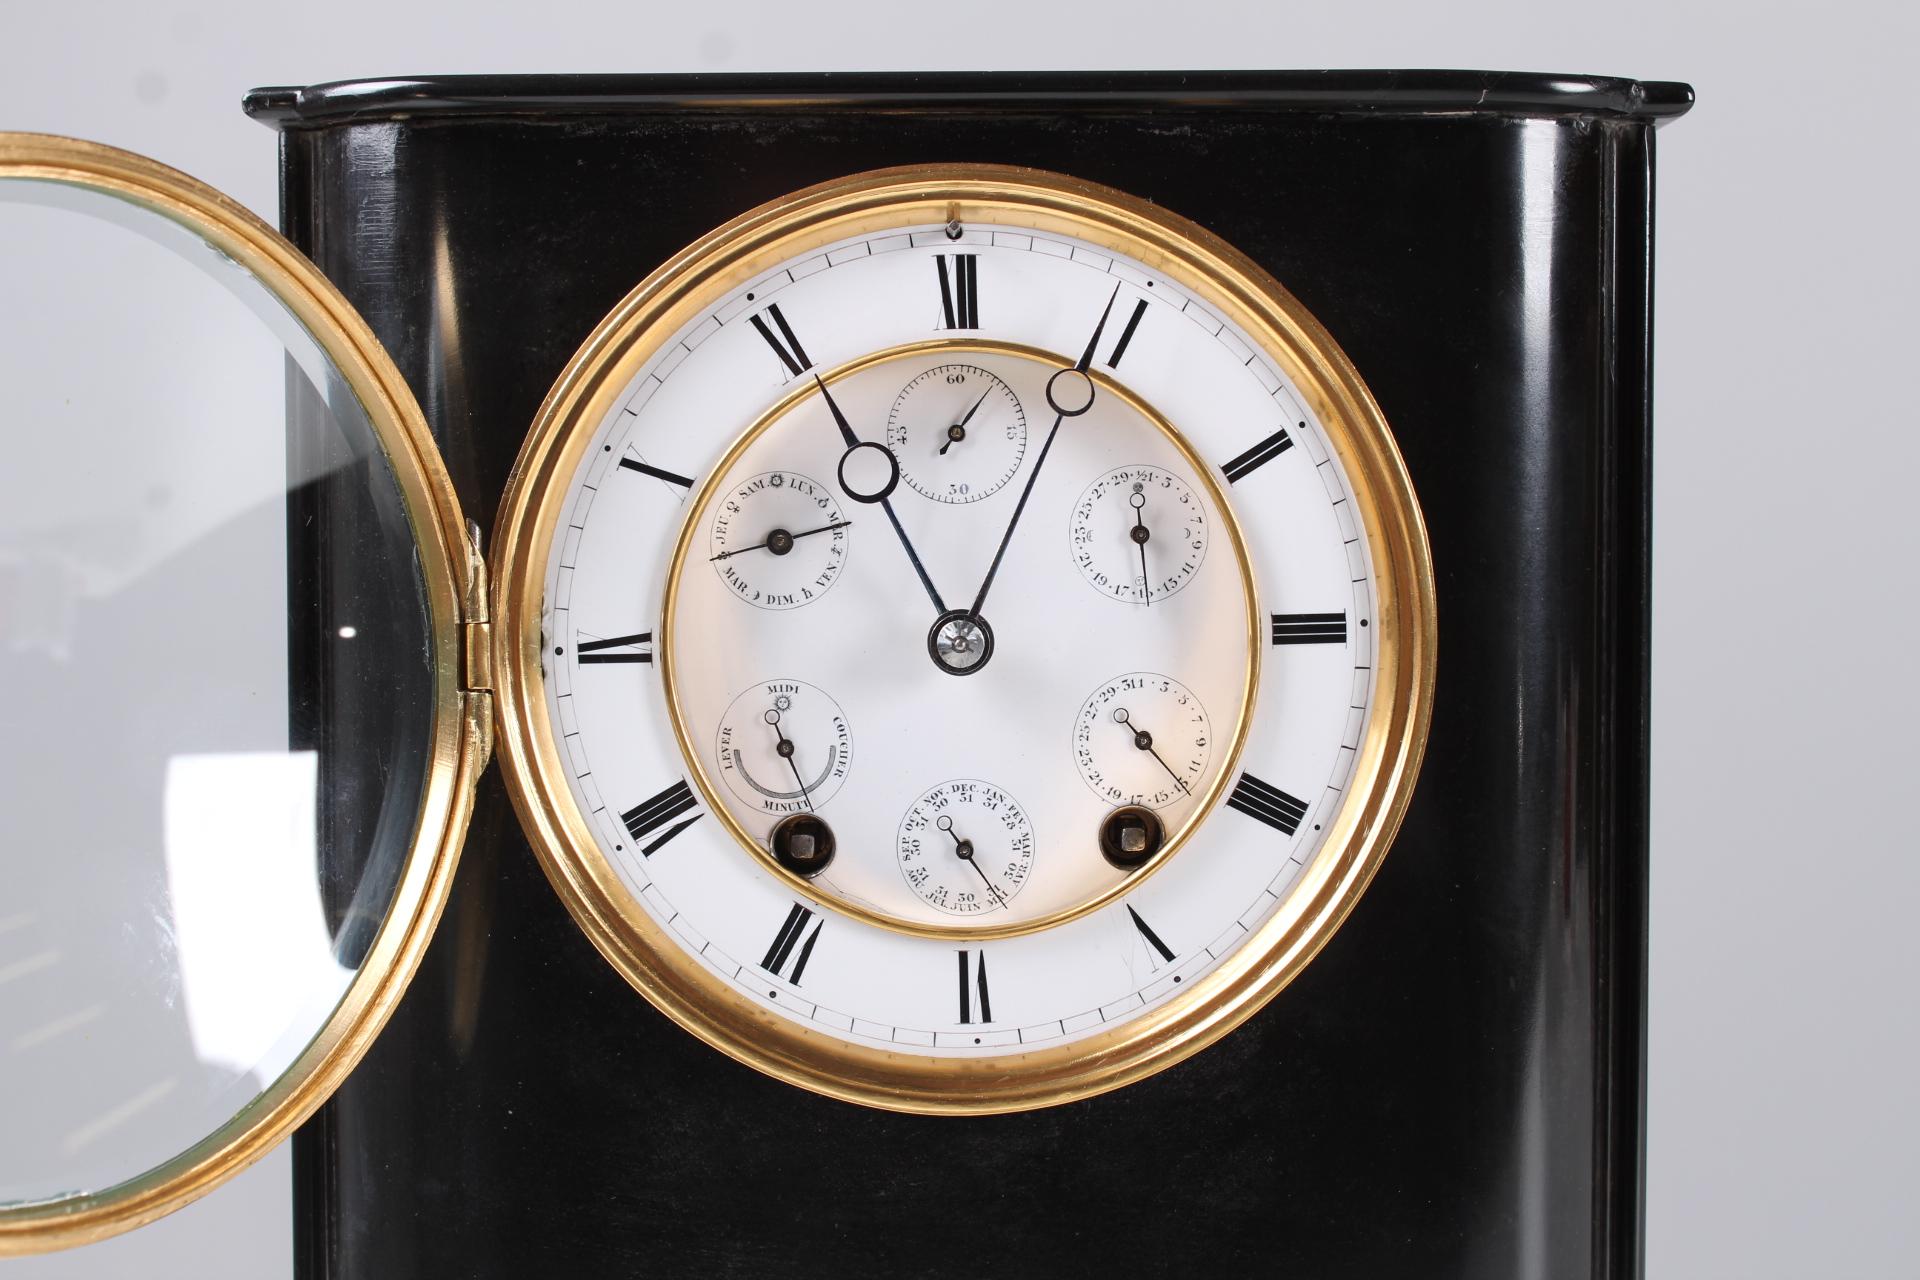 Rare mantel clock with six complications

Paris
marble, enamel
around 1860-1870

Dimensions: H x W x D: 30 x 24 x 14 cm

Extremely rare historicism pendulum in black marble case typical of the period. Curved base, slightly protruding top